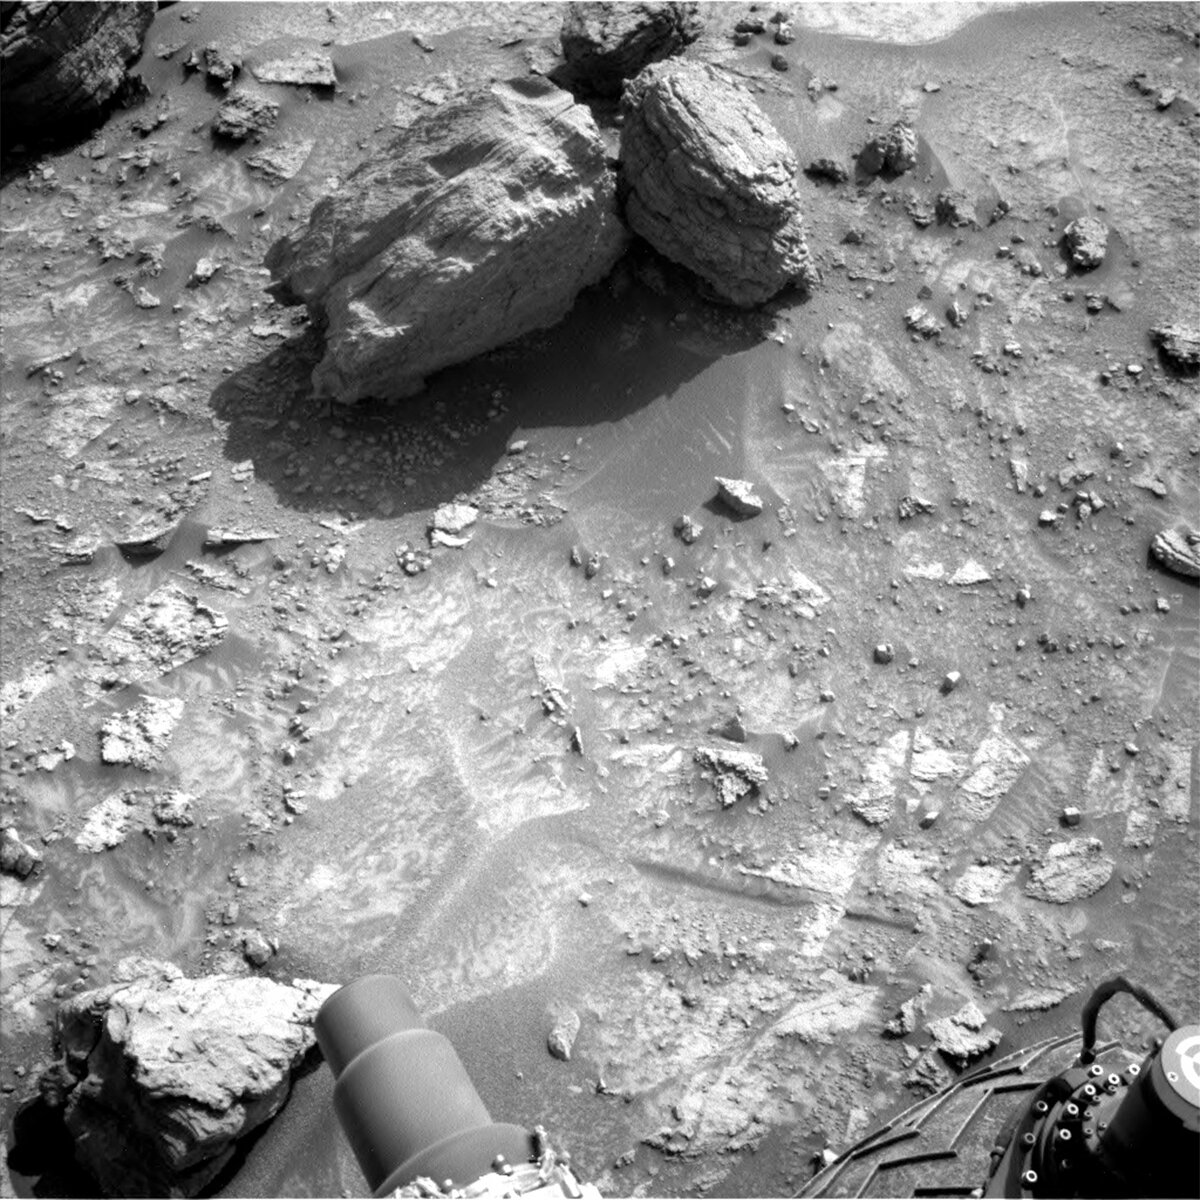 Left Nav camera image from sol 3543, showing the float blocks “Tumereng” and “Muruwa."